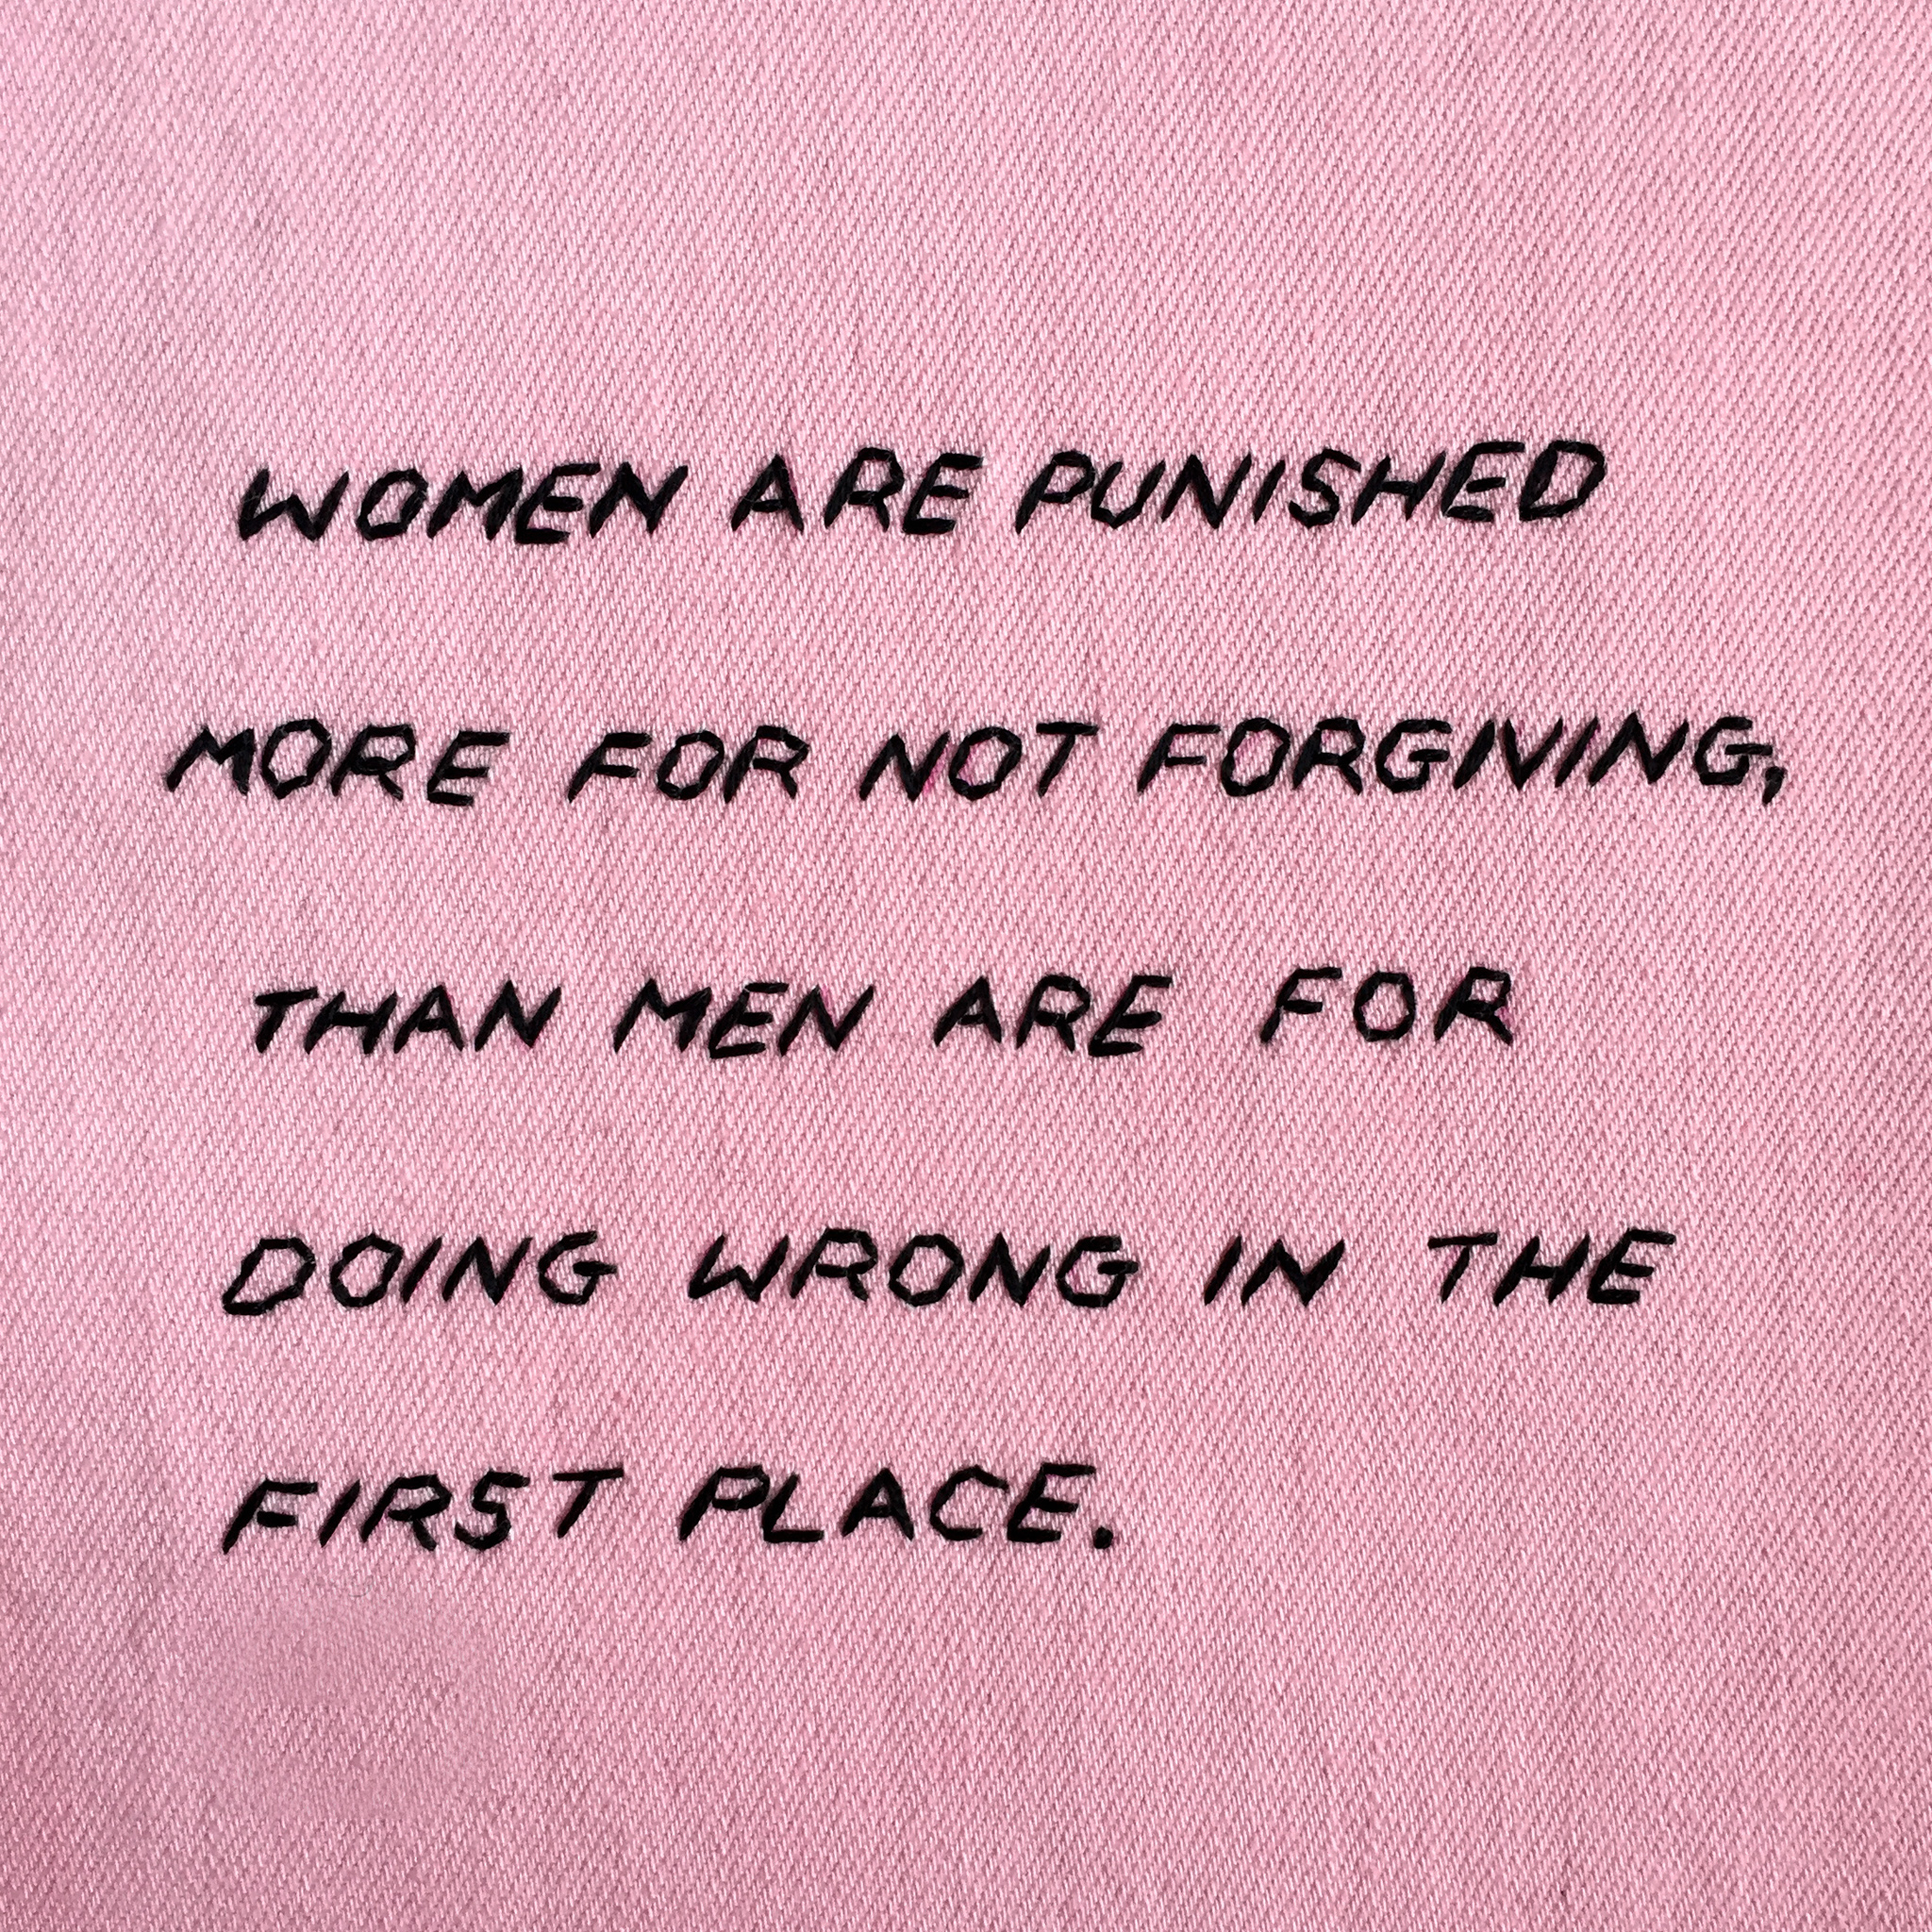 embroidered "women are punished more for not forgiving, than men are for doing wrong in the first place" 2019, Sophie King